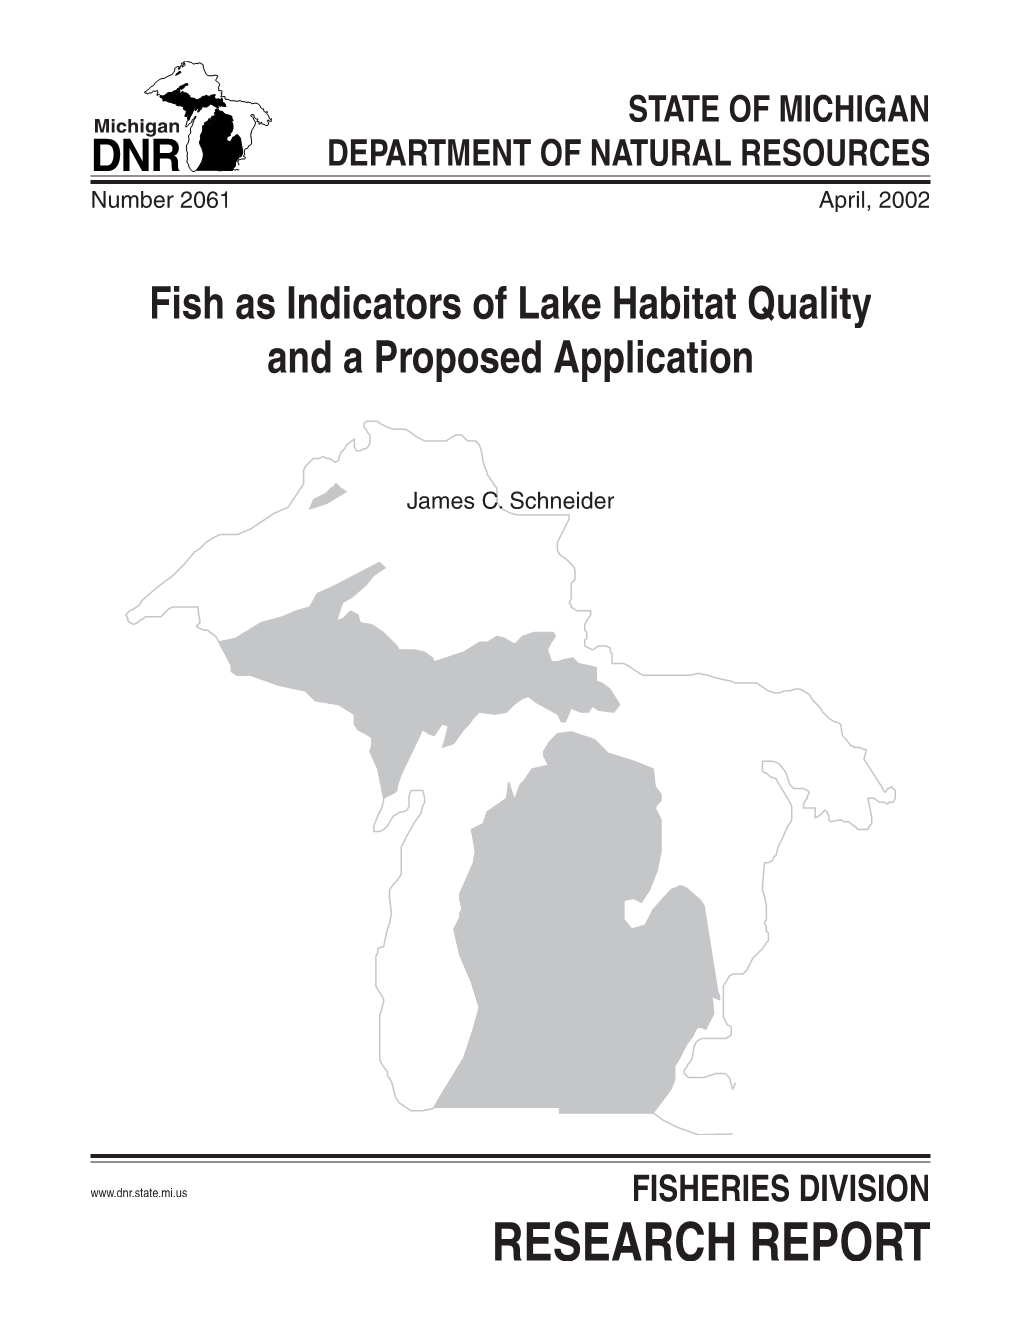 Fish As Indicators of Lake Habitat Quality and a Proposed Application